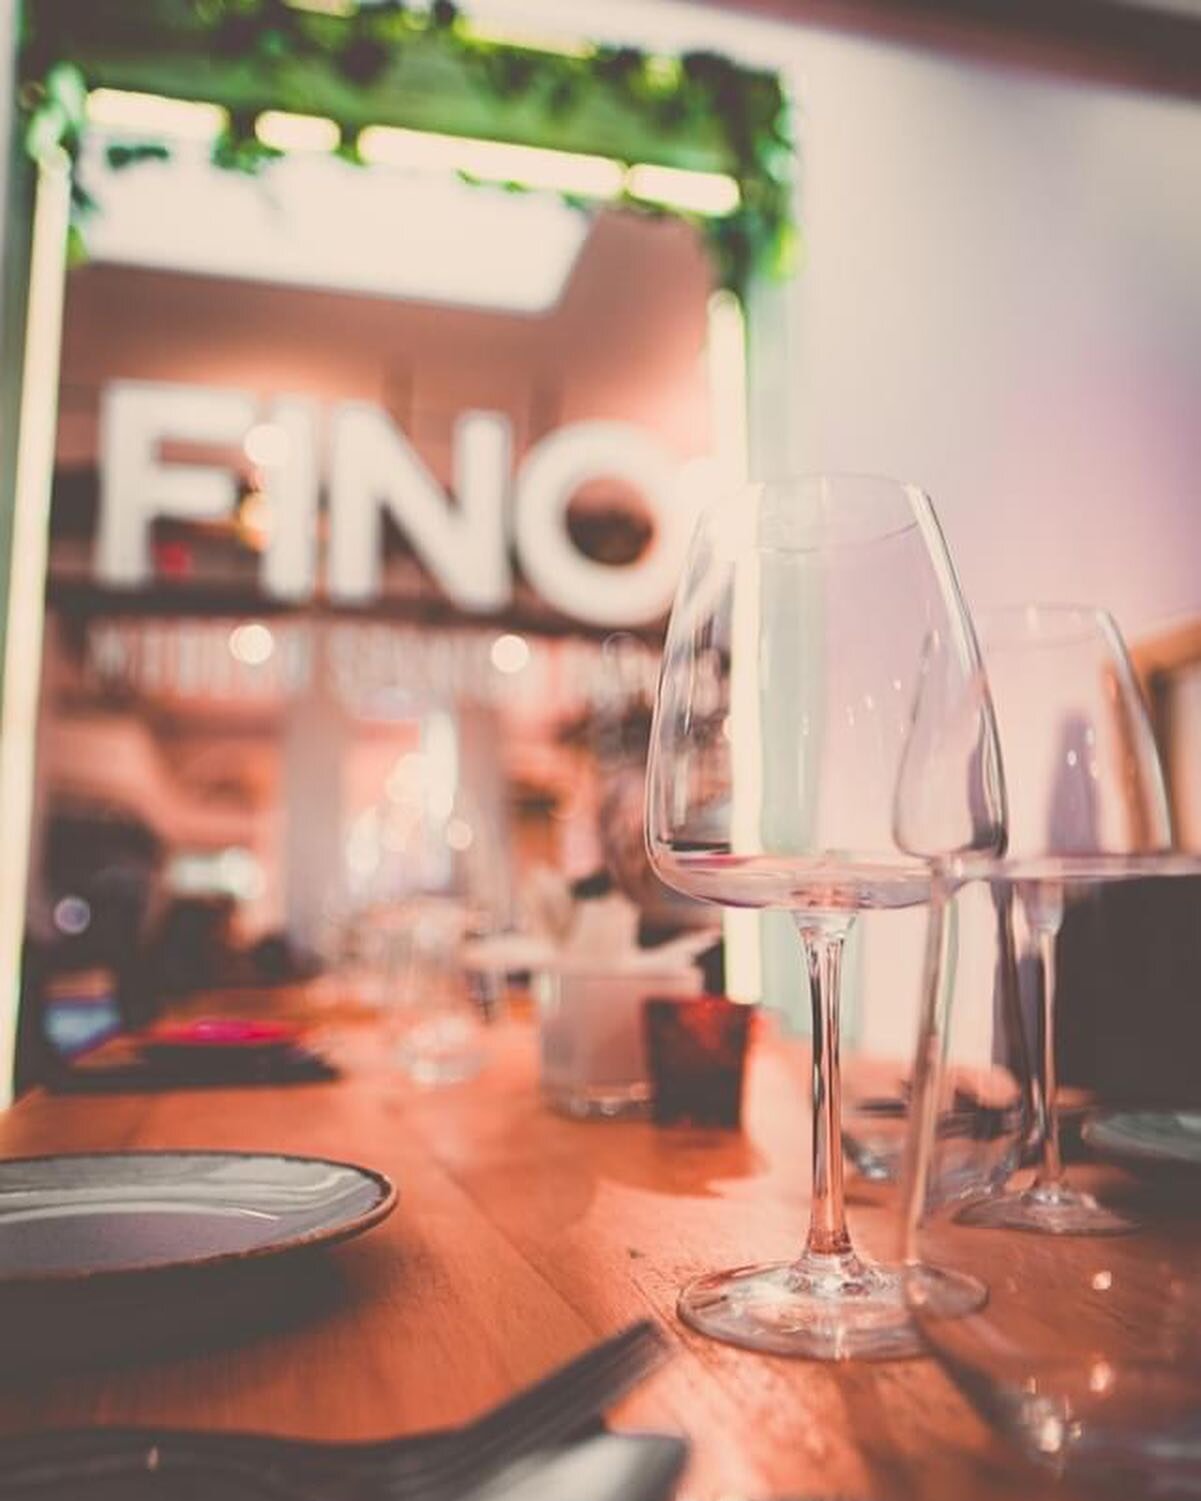 Have you been to visit us yet? 

We're offering 25% off our &agrave; la carte menu Monday to Thursday from 12pm - close! 

Available until the end of September 🥂

Book online using the link in our bio @finotapas